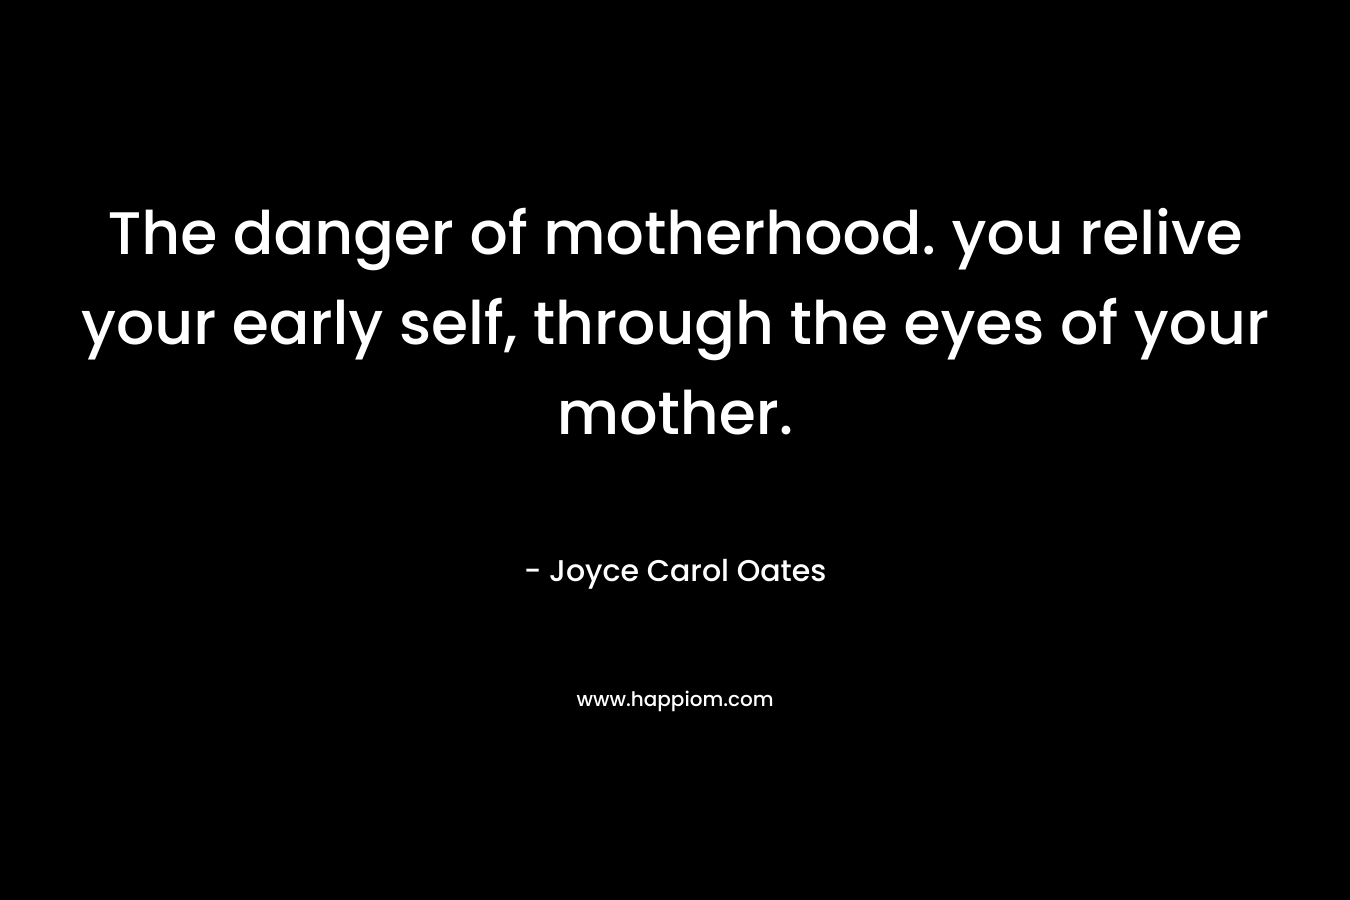 The danger of motherhood. you relive your early self, through the eyes of your mother. – Joyce Carol Oates